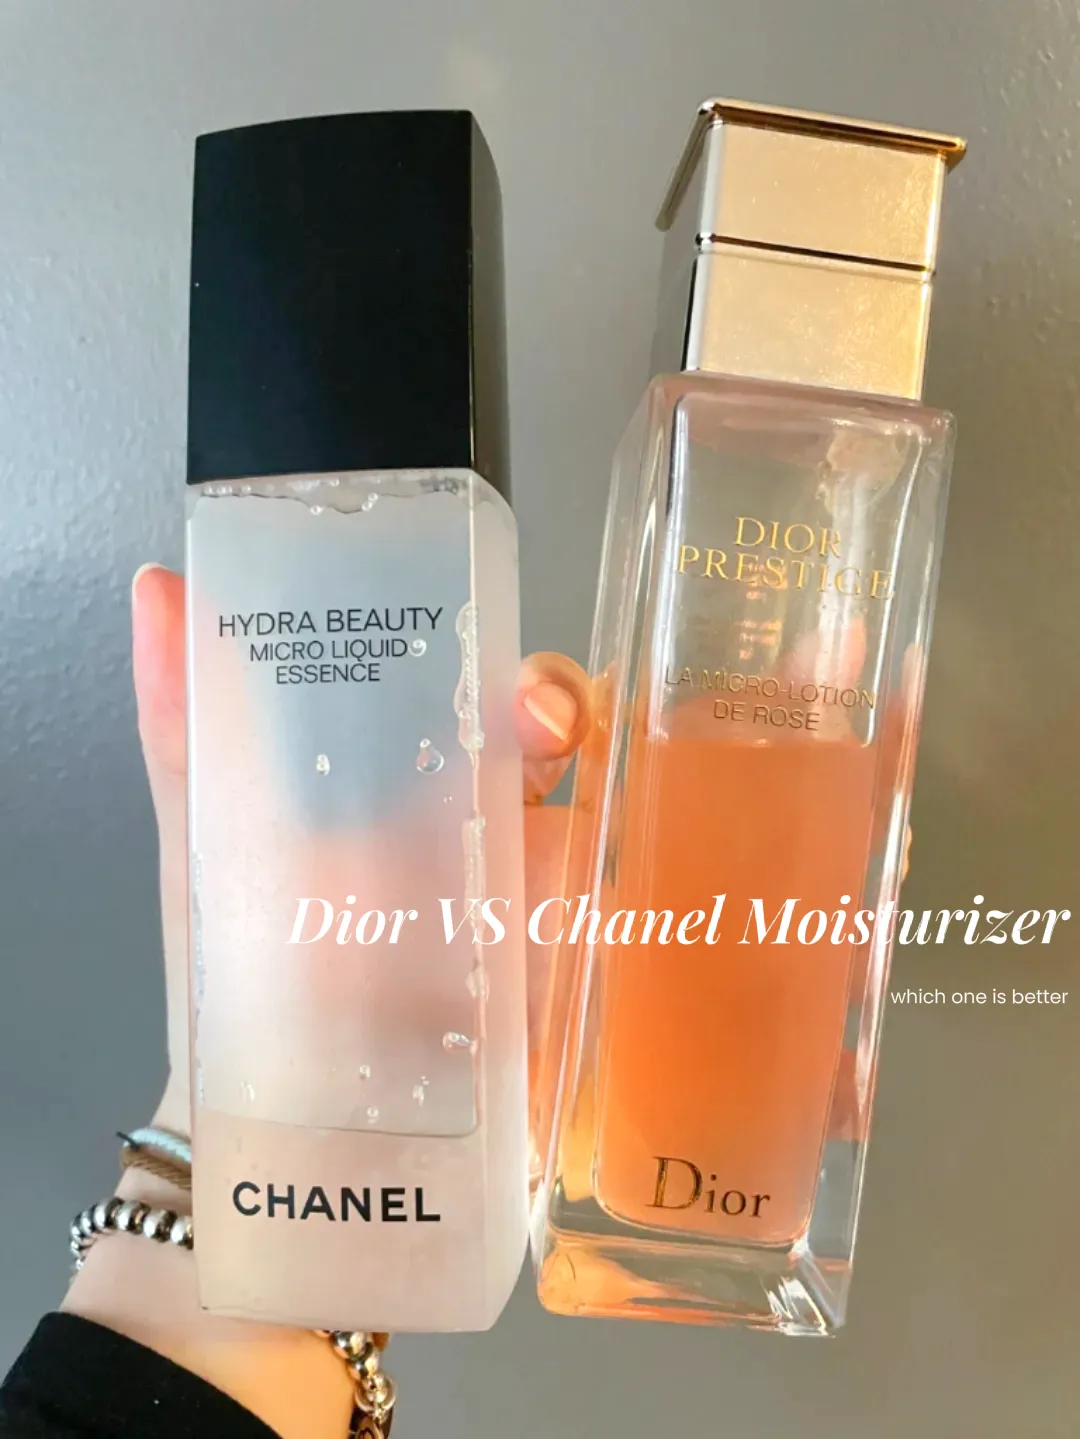 Dior VS Chanel Moisturizer (which one is better?), Gallery posted by Reign  Georgia